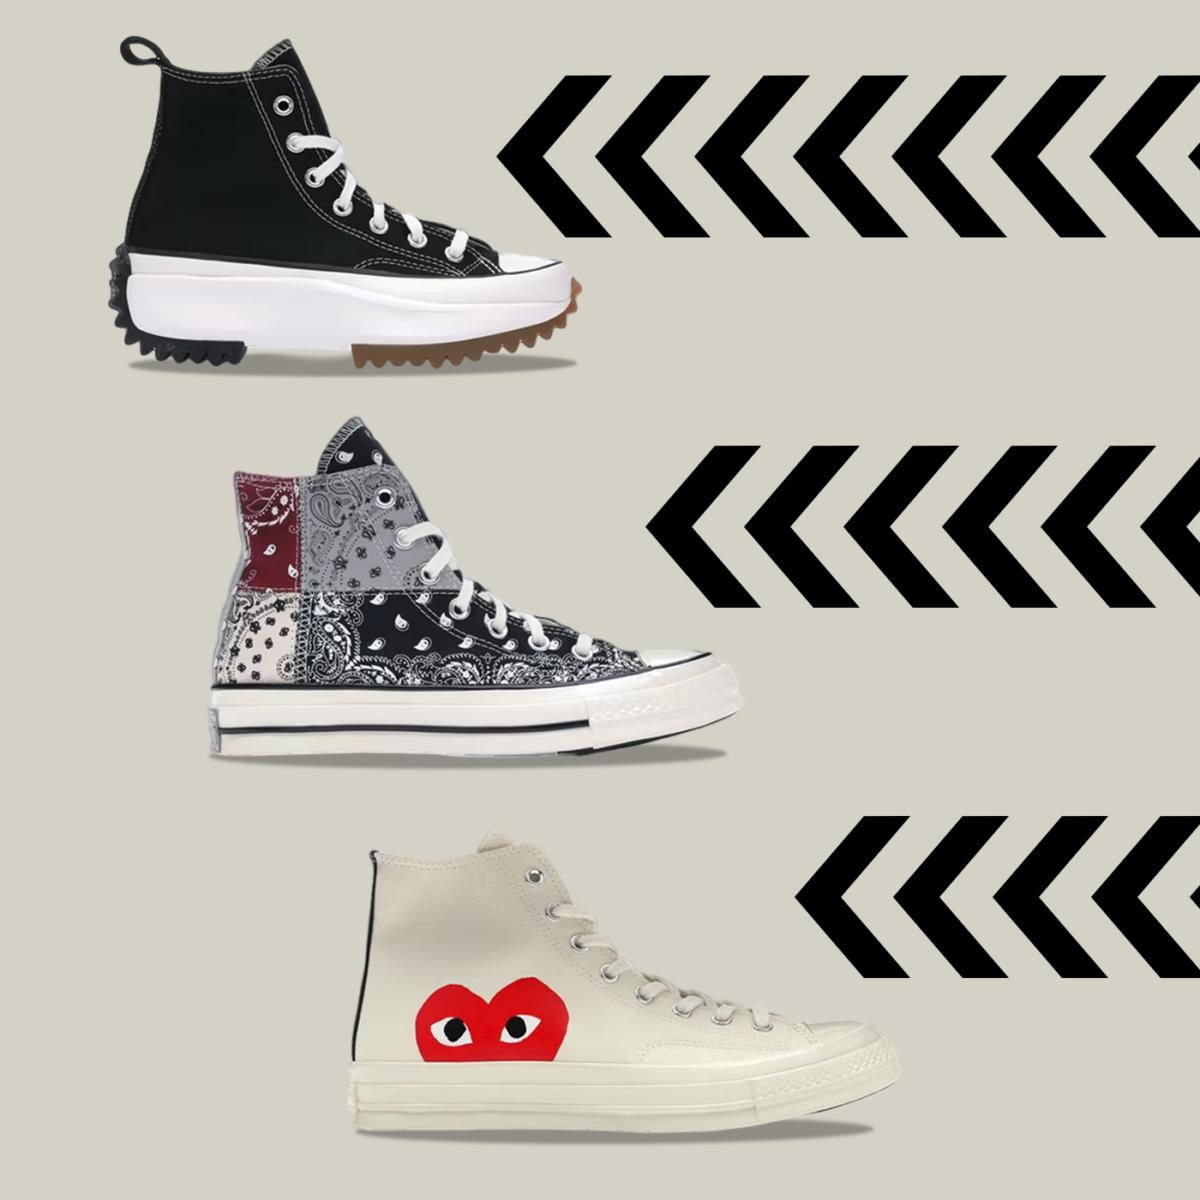 Converse Footwear, Apparel, and Accessories